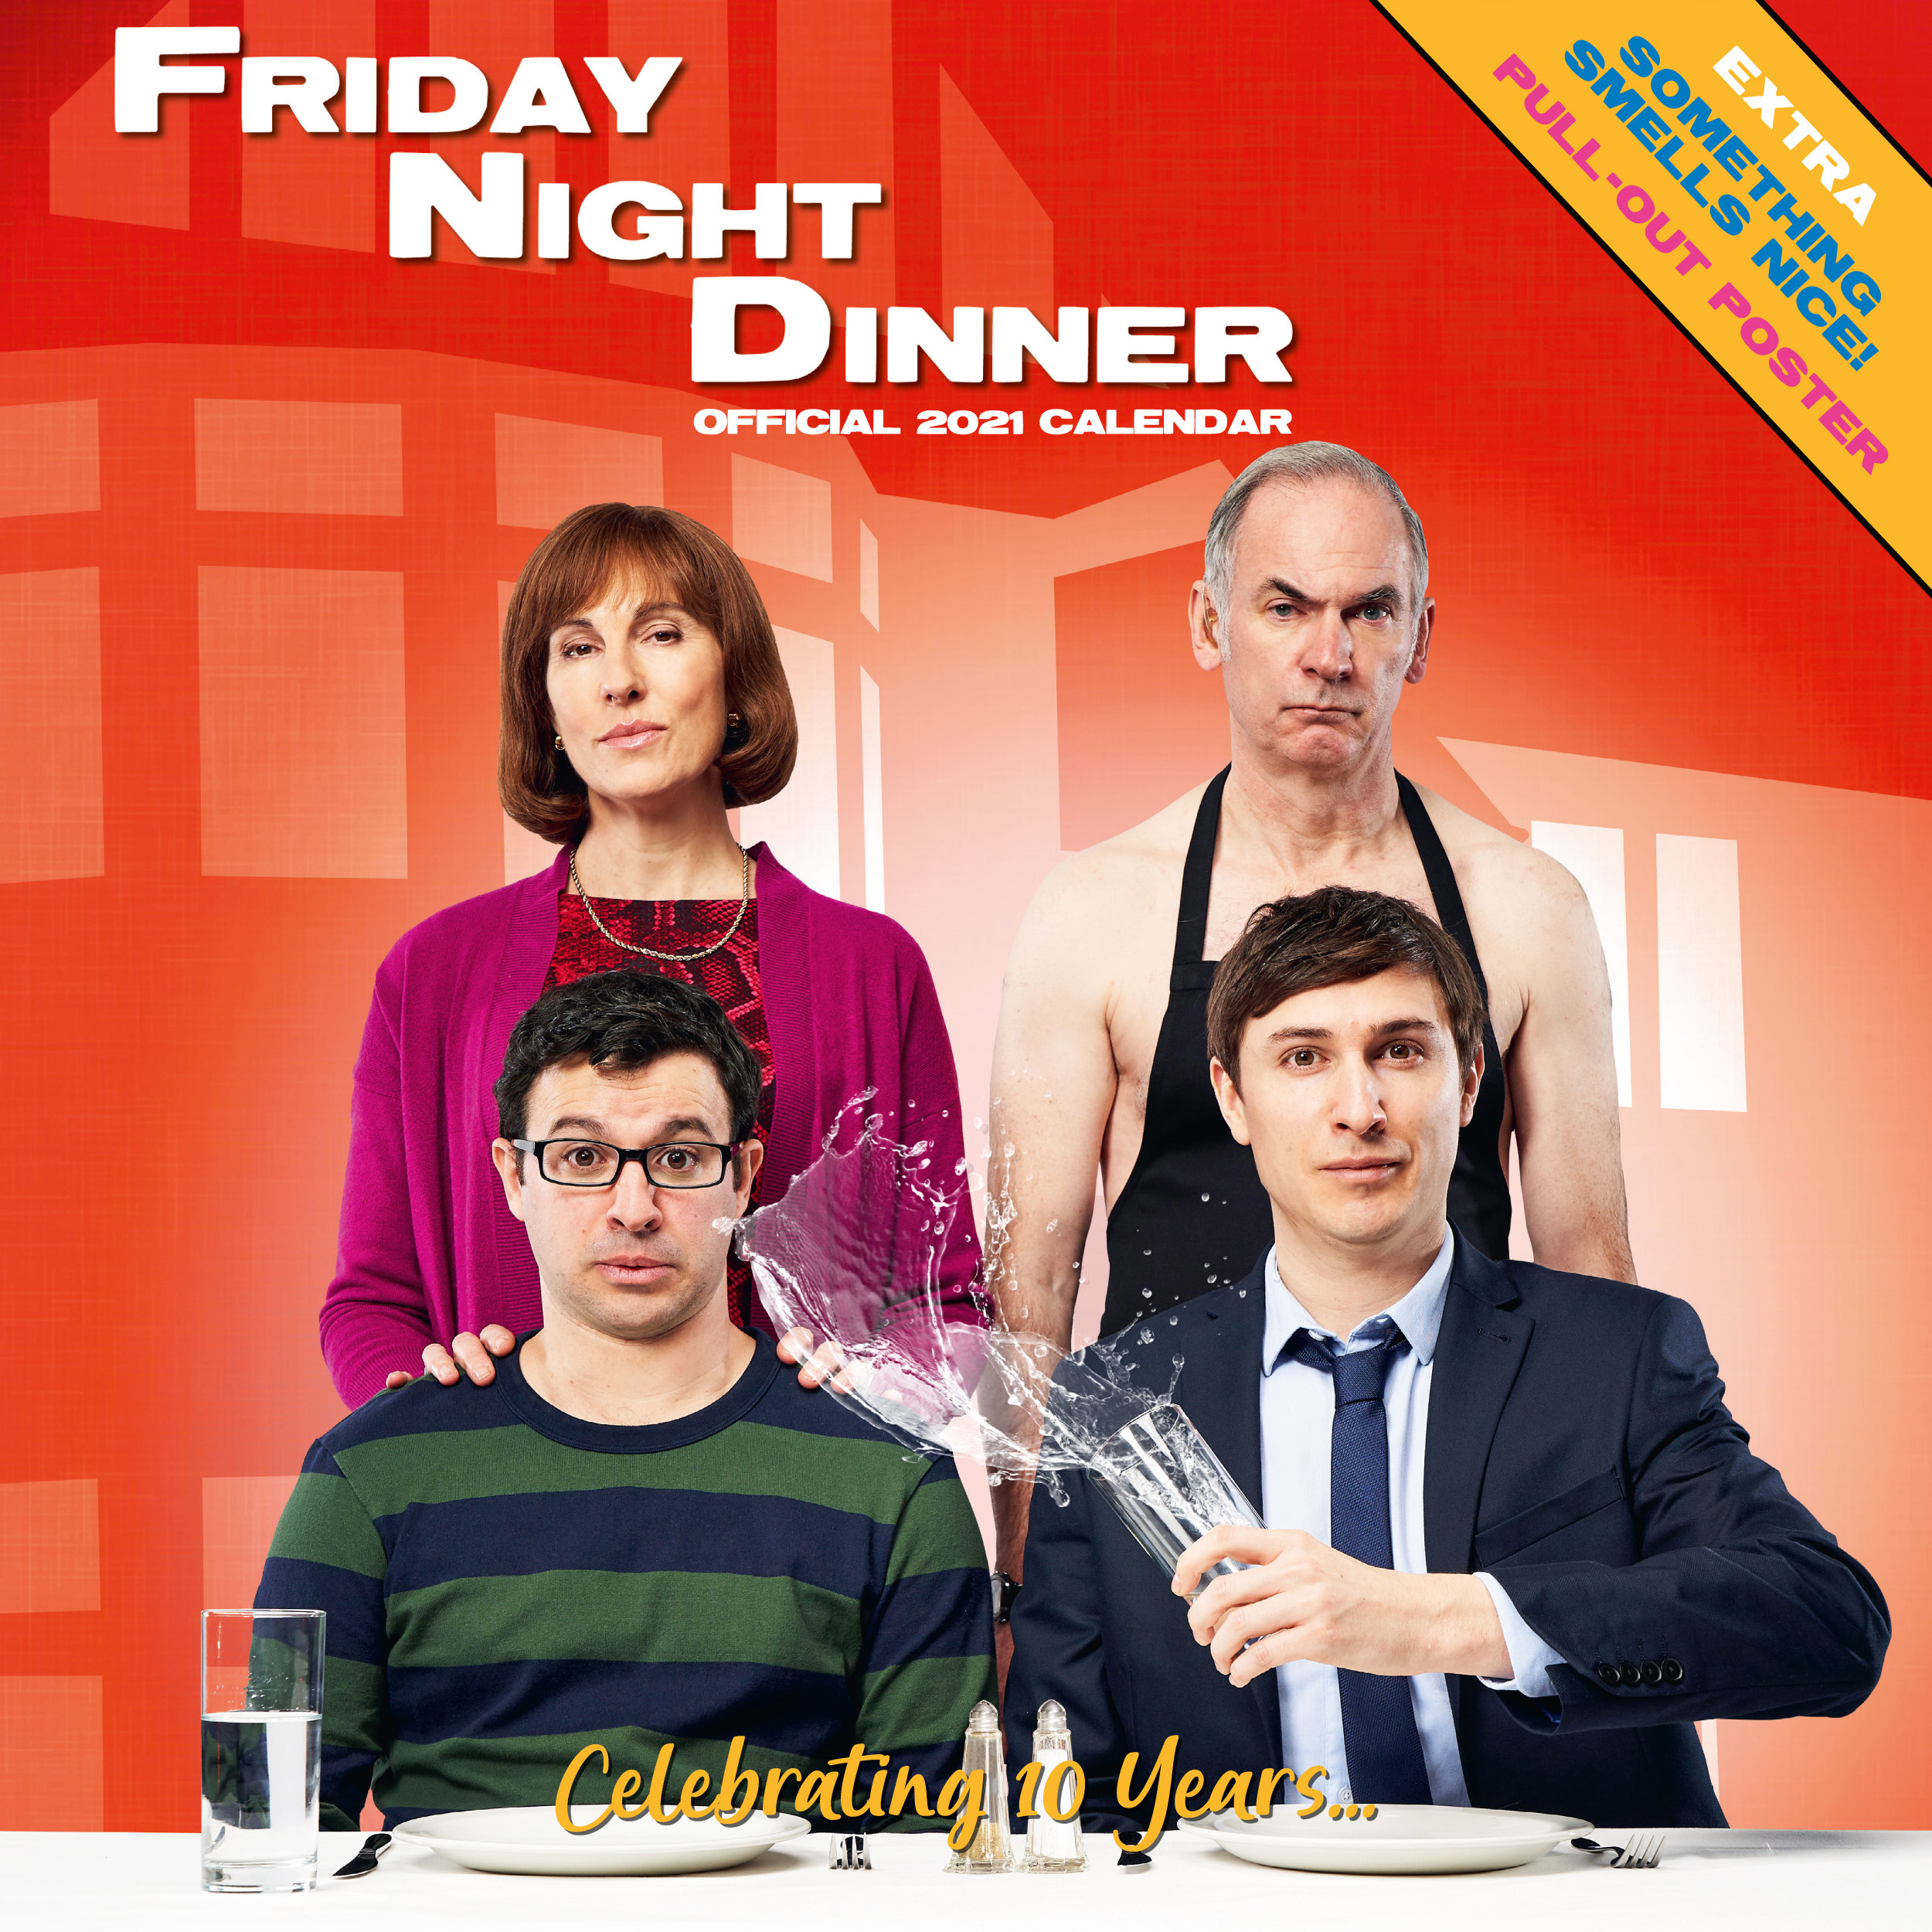 Above: Comedy hit, Friday Night Dinner is one of the latest calendar signings by Danilo.